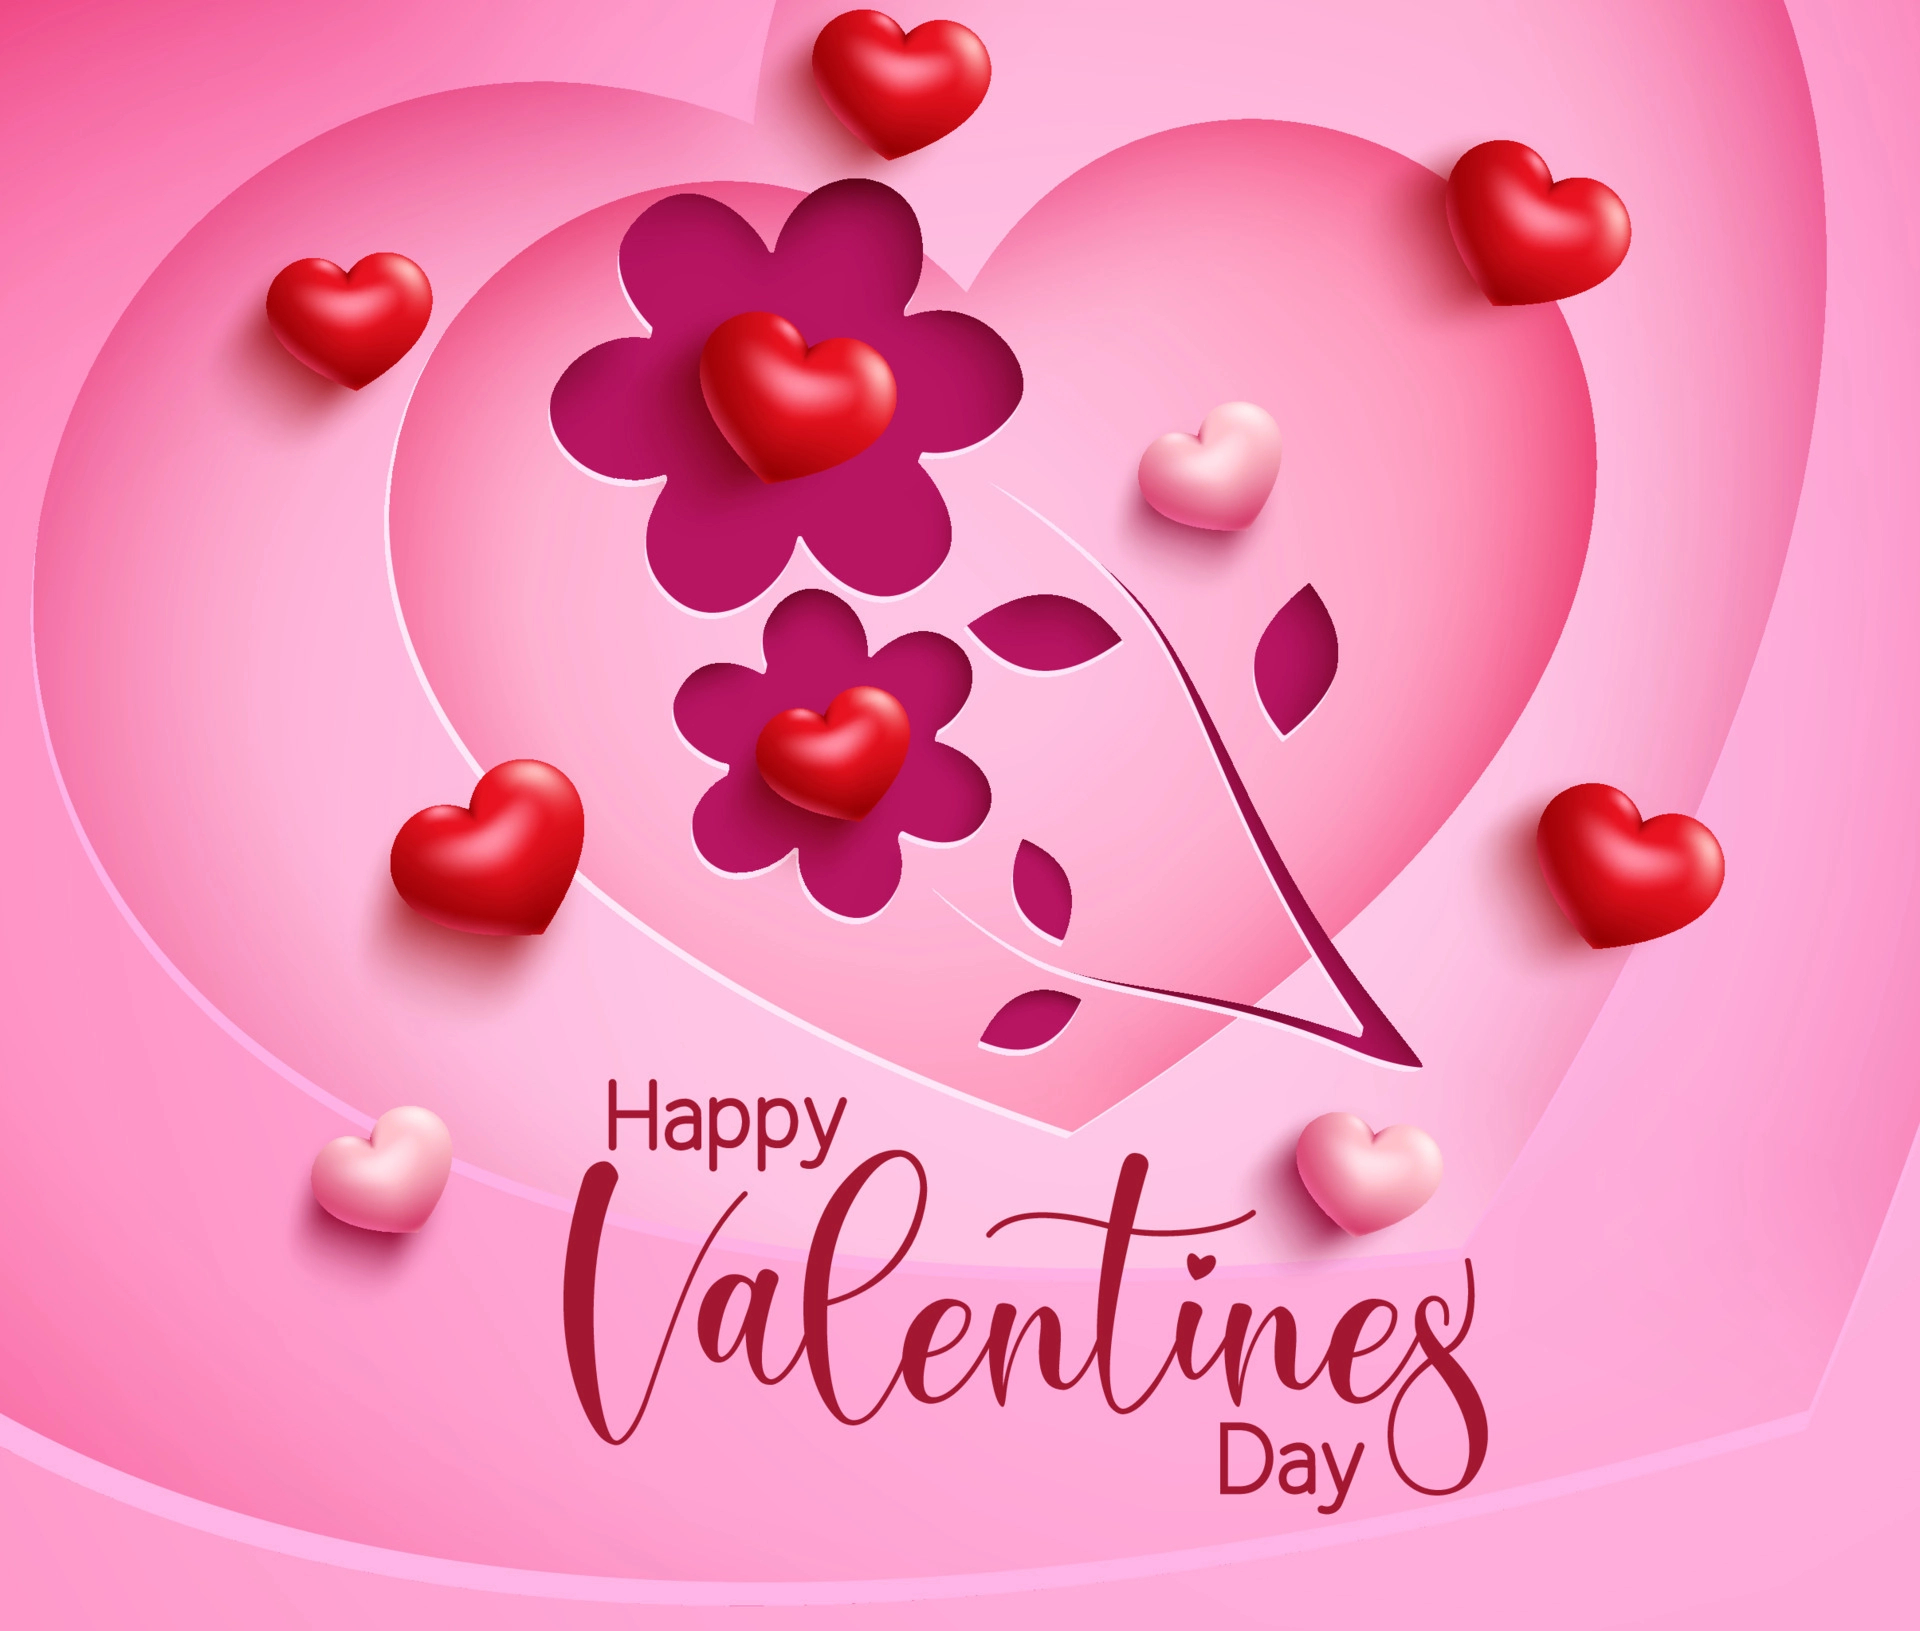 1920x1631 Valentines flower vector background design. Happy valentine's day text with paper cut flowers shape and 3d heart element for sweet and cute valentine greeting design. Vector illustration 4852345 Vector Art